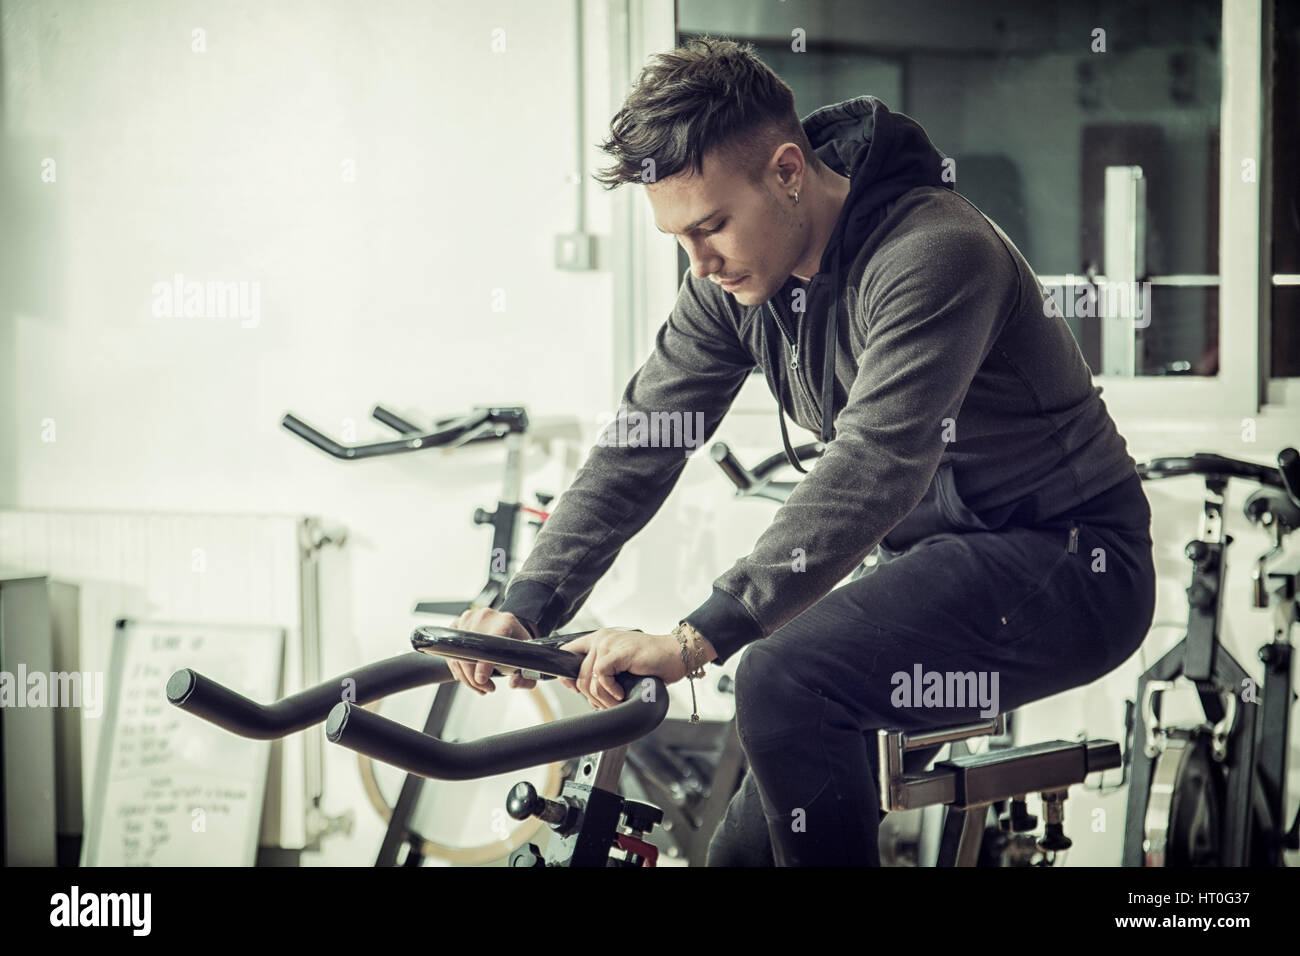 Young man exercising in gym: spinning on stationary bike Stock Photo